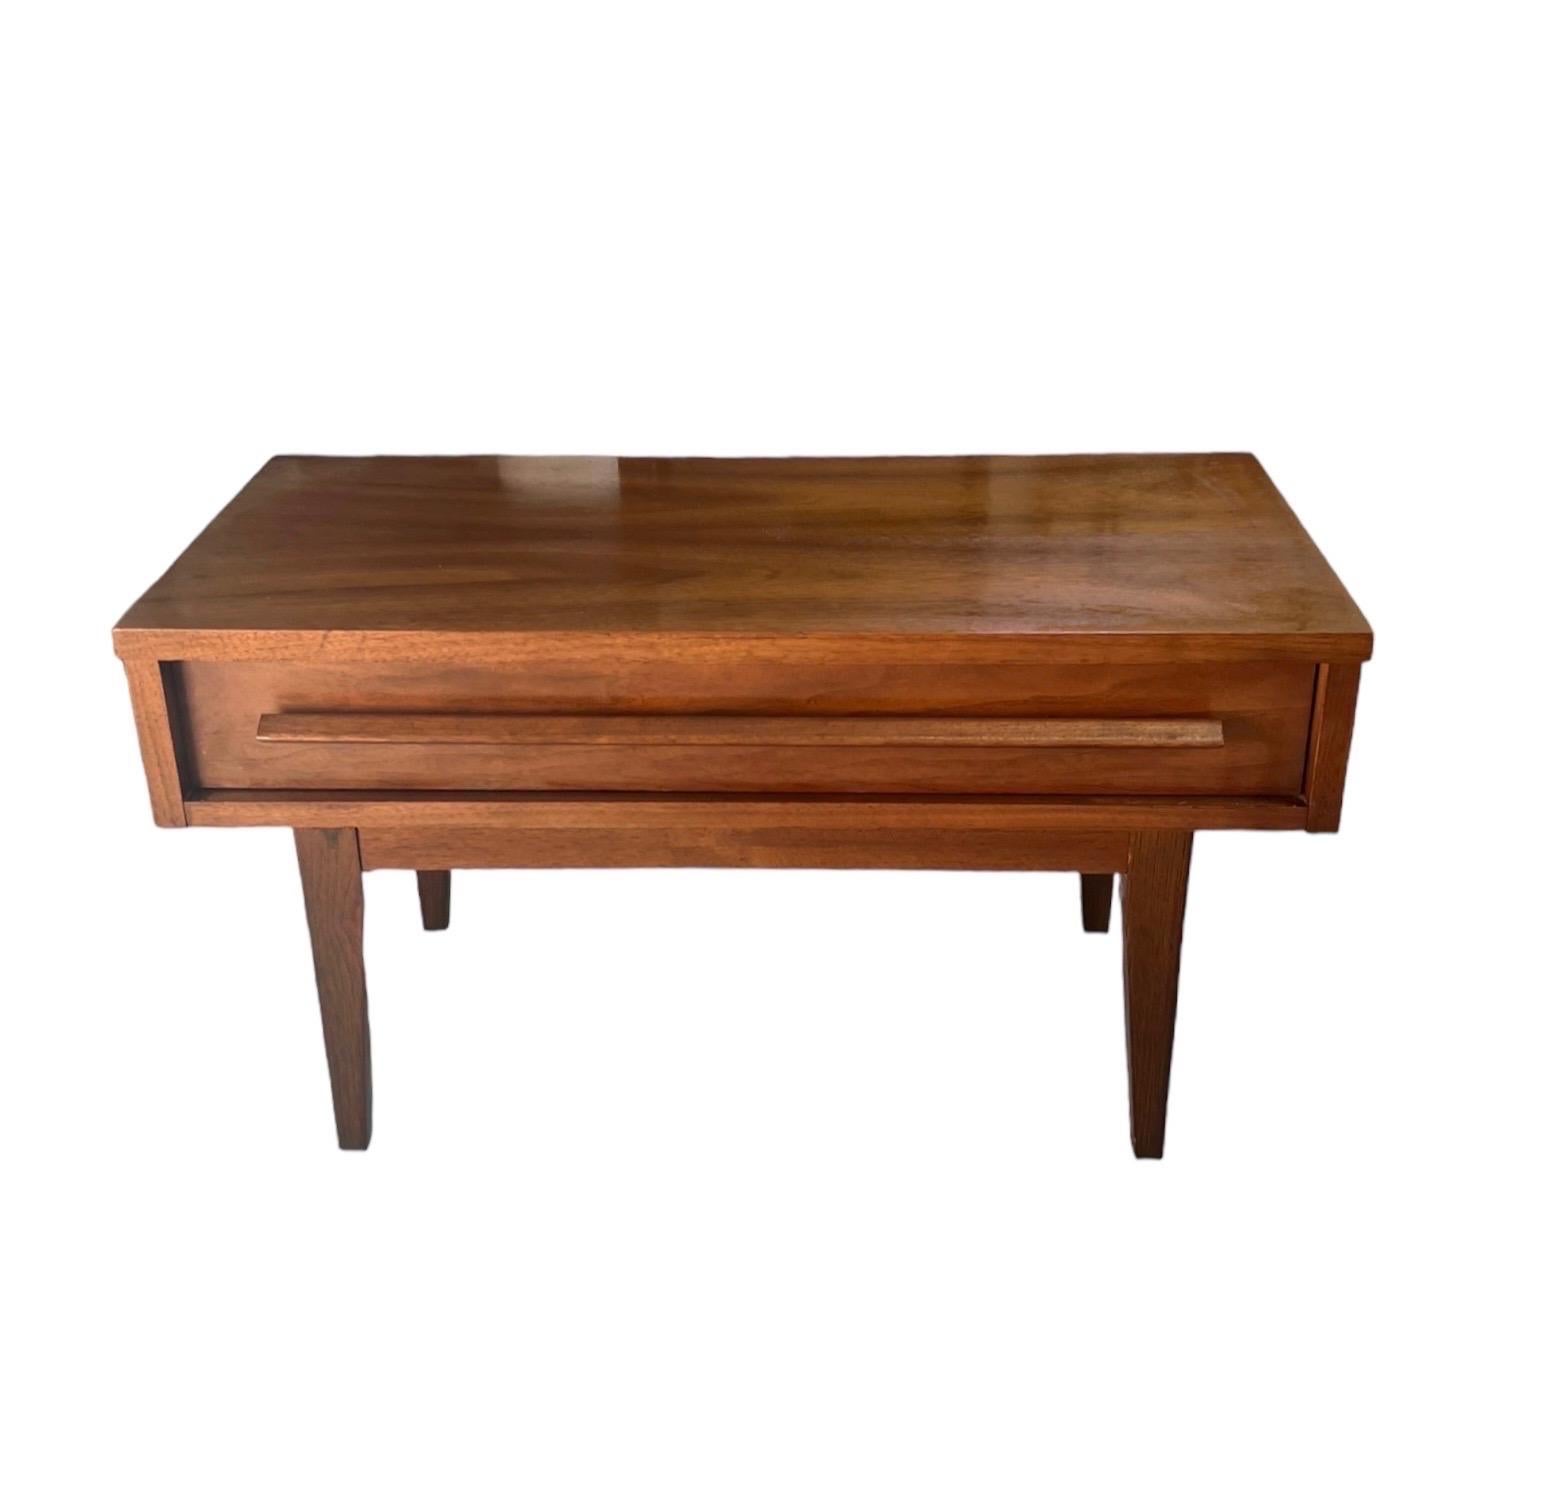 Vintage Mid Century Modern End Table or Stand With Dovetailed Drawer Cherry Wood In Good Condition For Sale In Seattle, WA